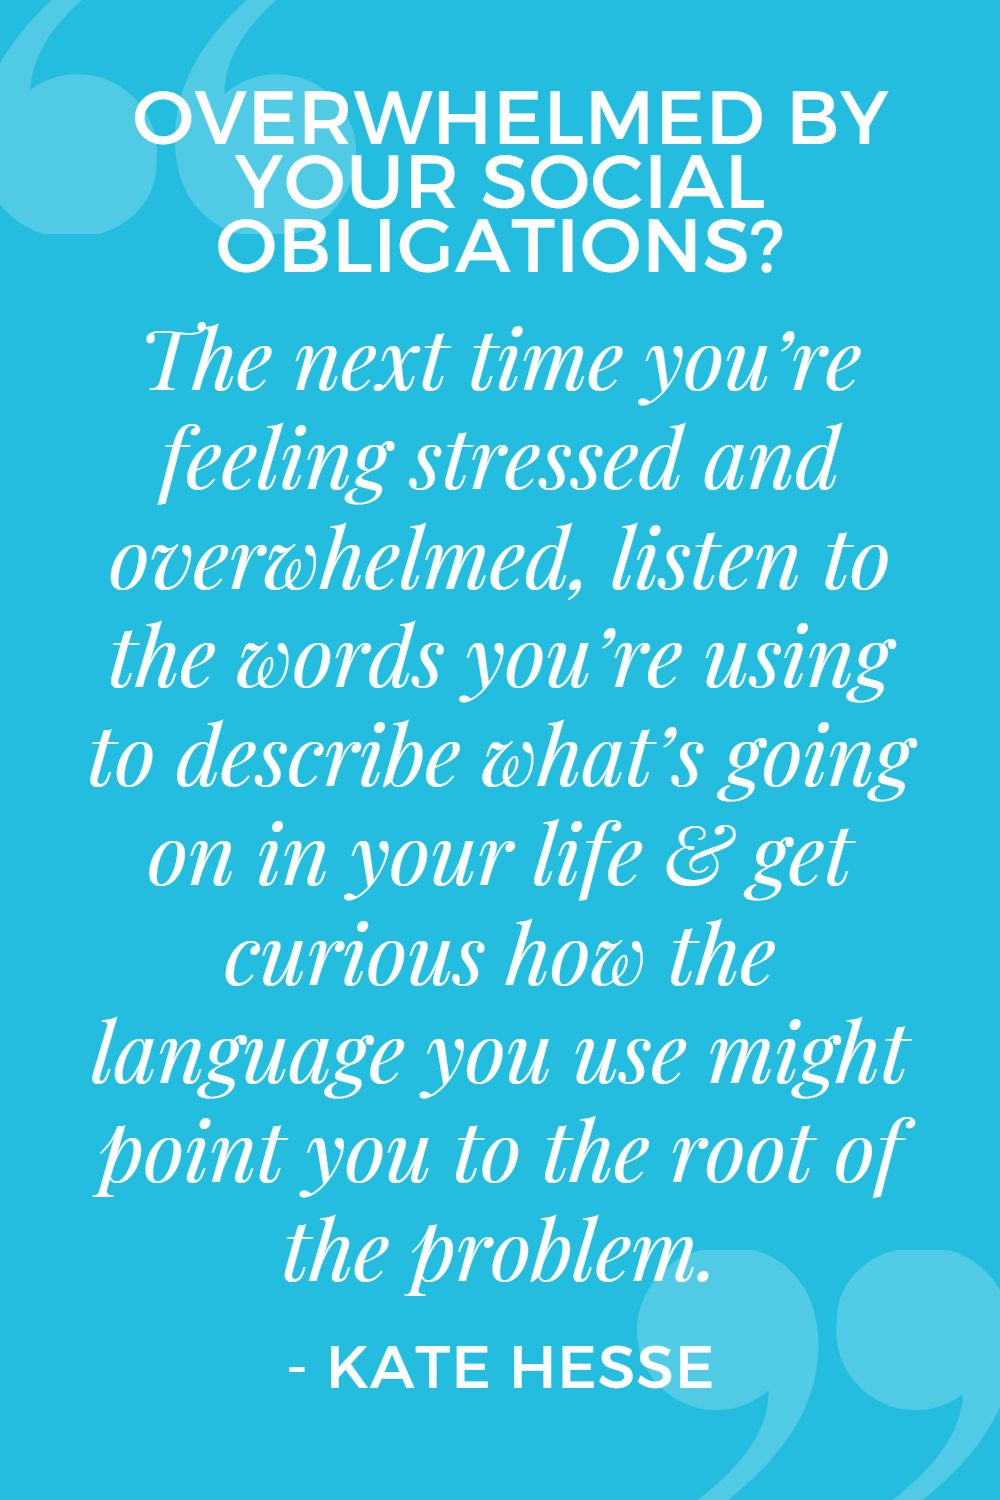 The next time you're feeling stressed and overwhelmed, listen to the words you're using to describe what's going on in your life & get curious how the language you use might point you to the root of the problem.